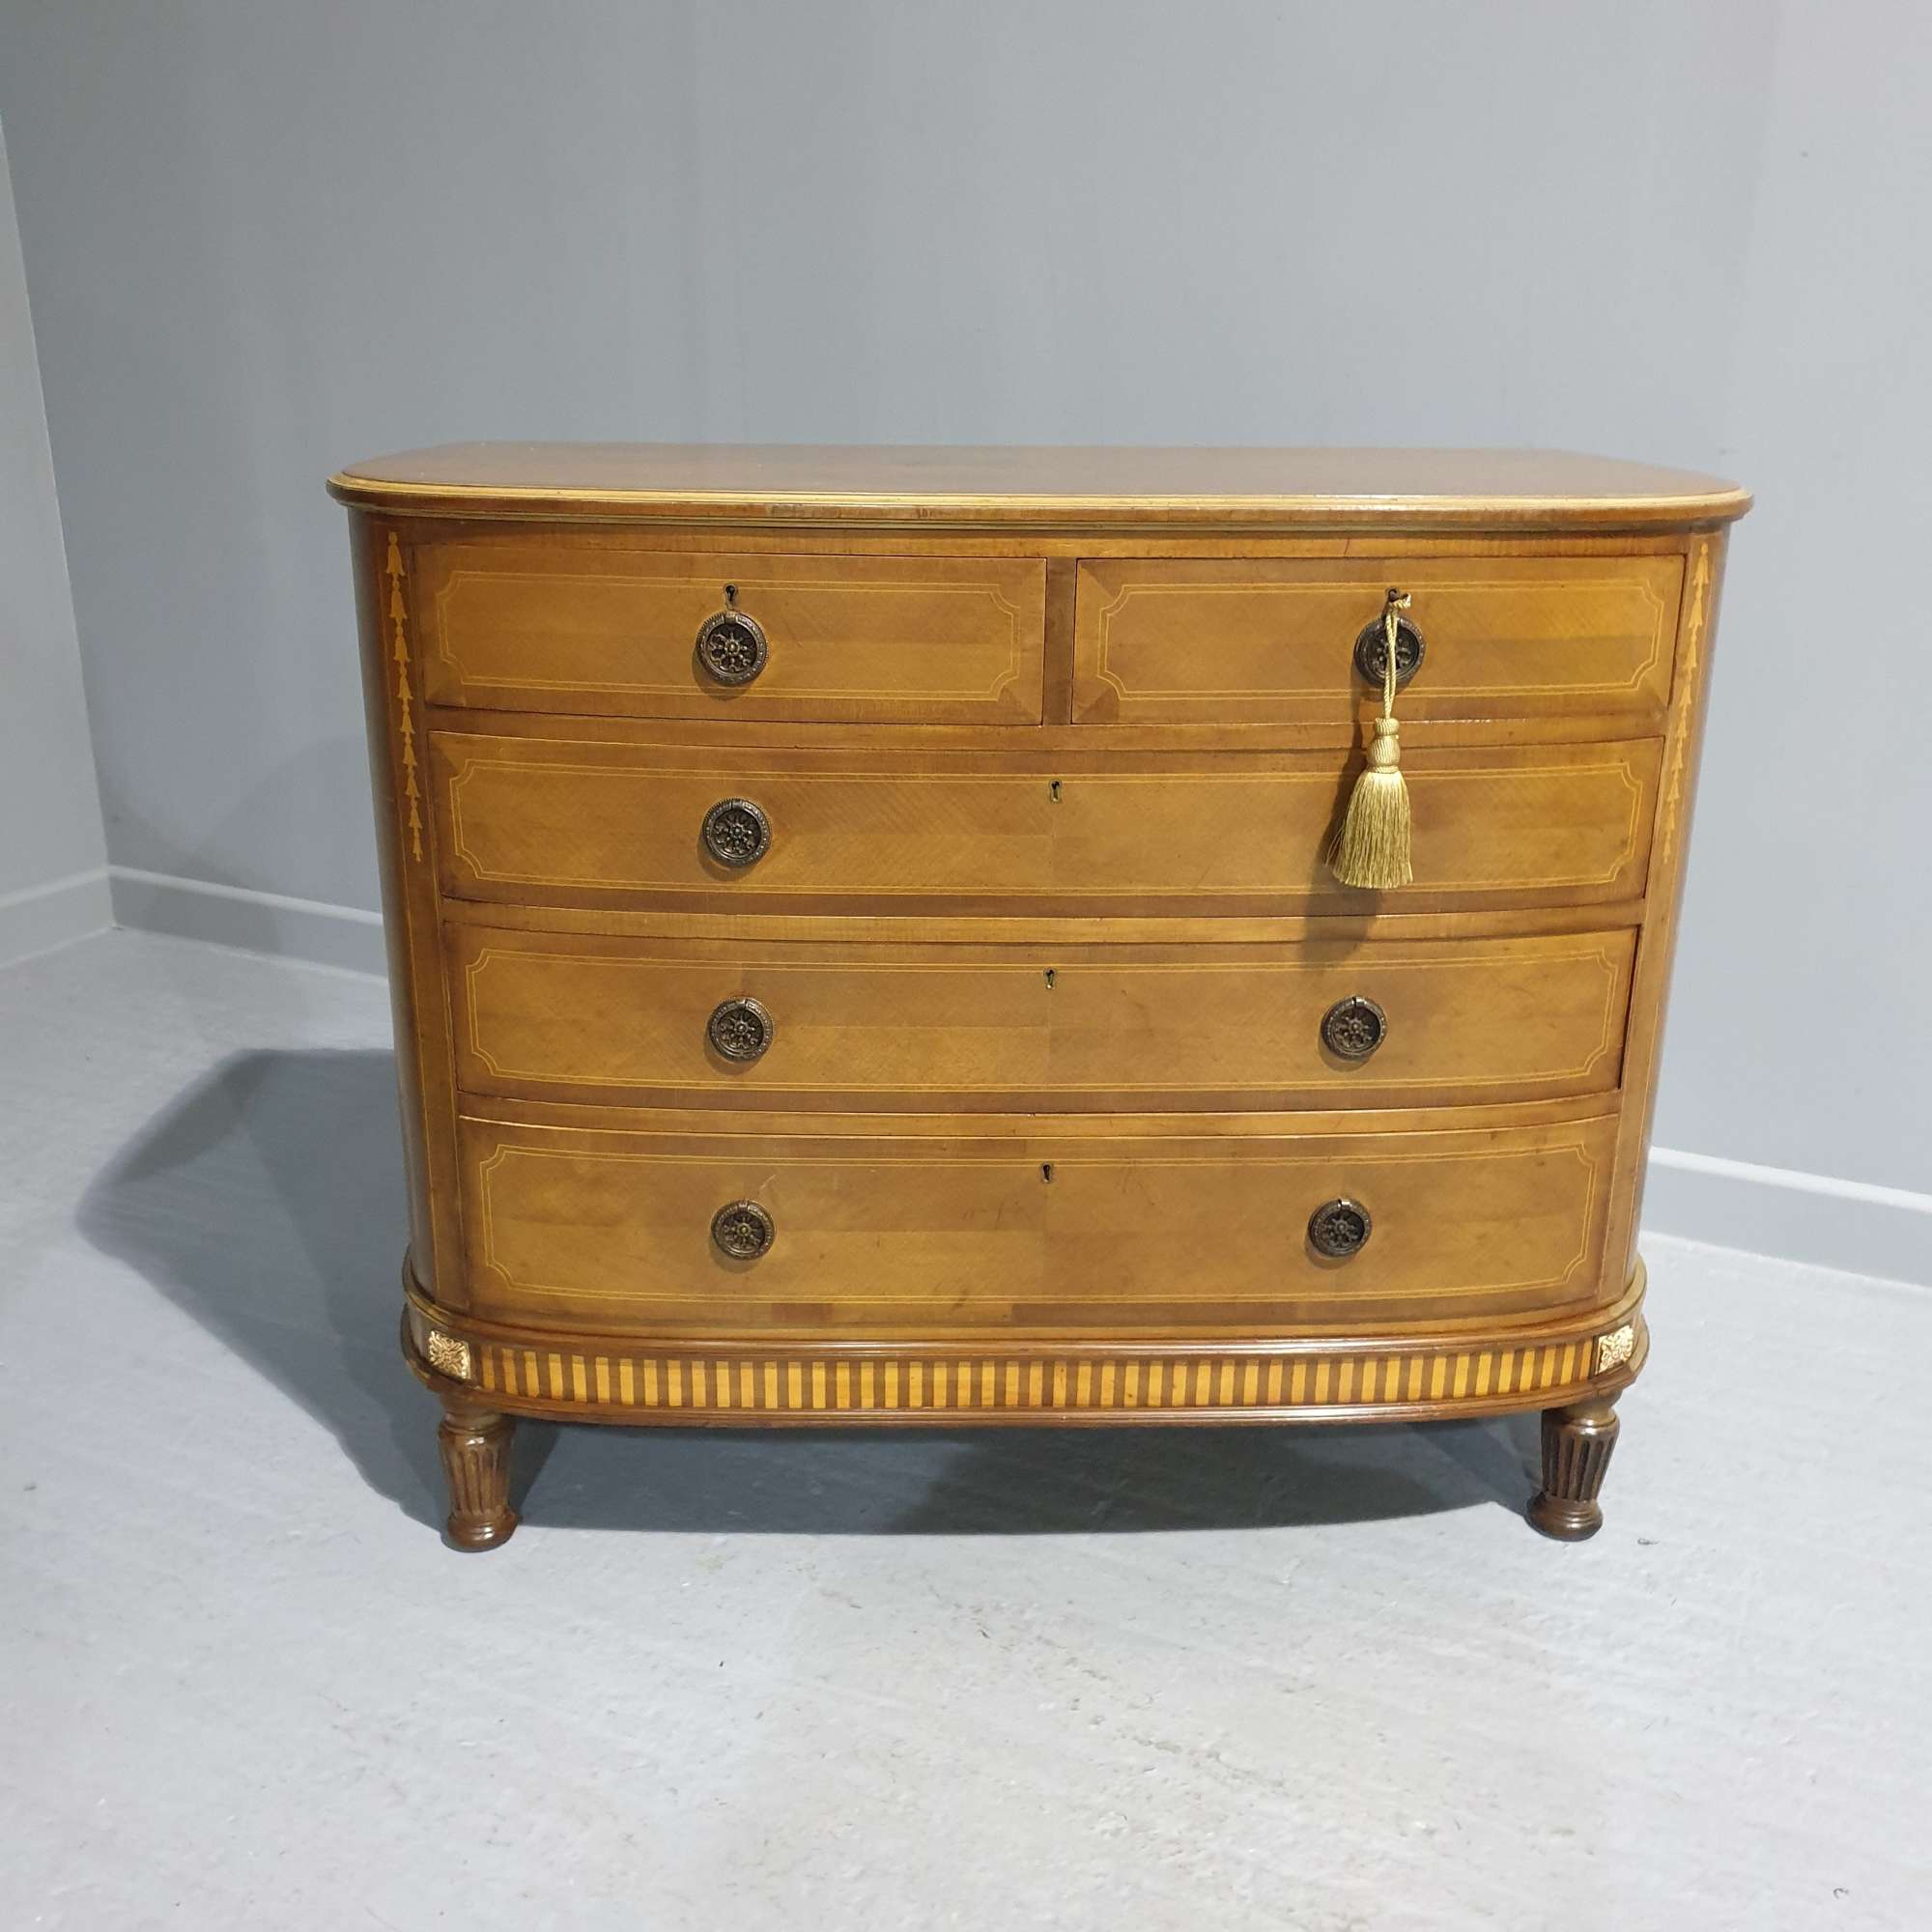 Very Good Inlaid Mahogany Antique Chest Of Drawers